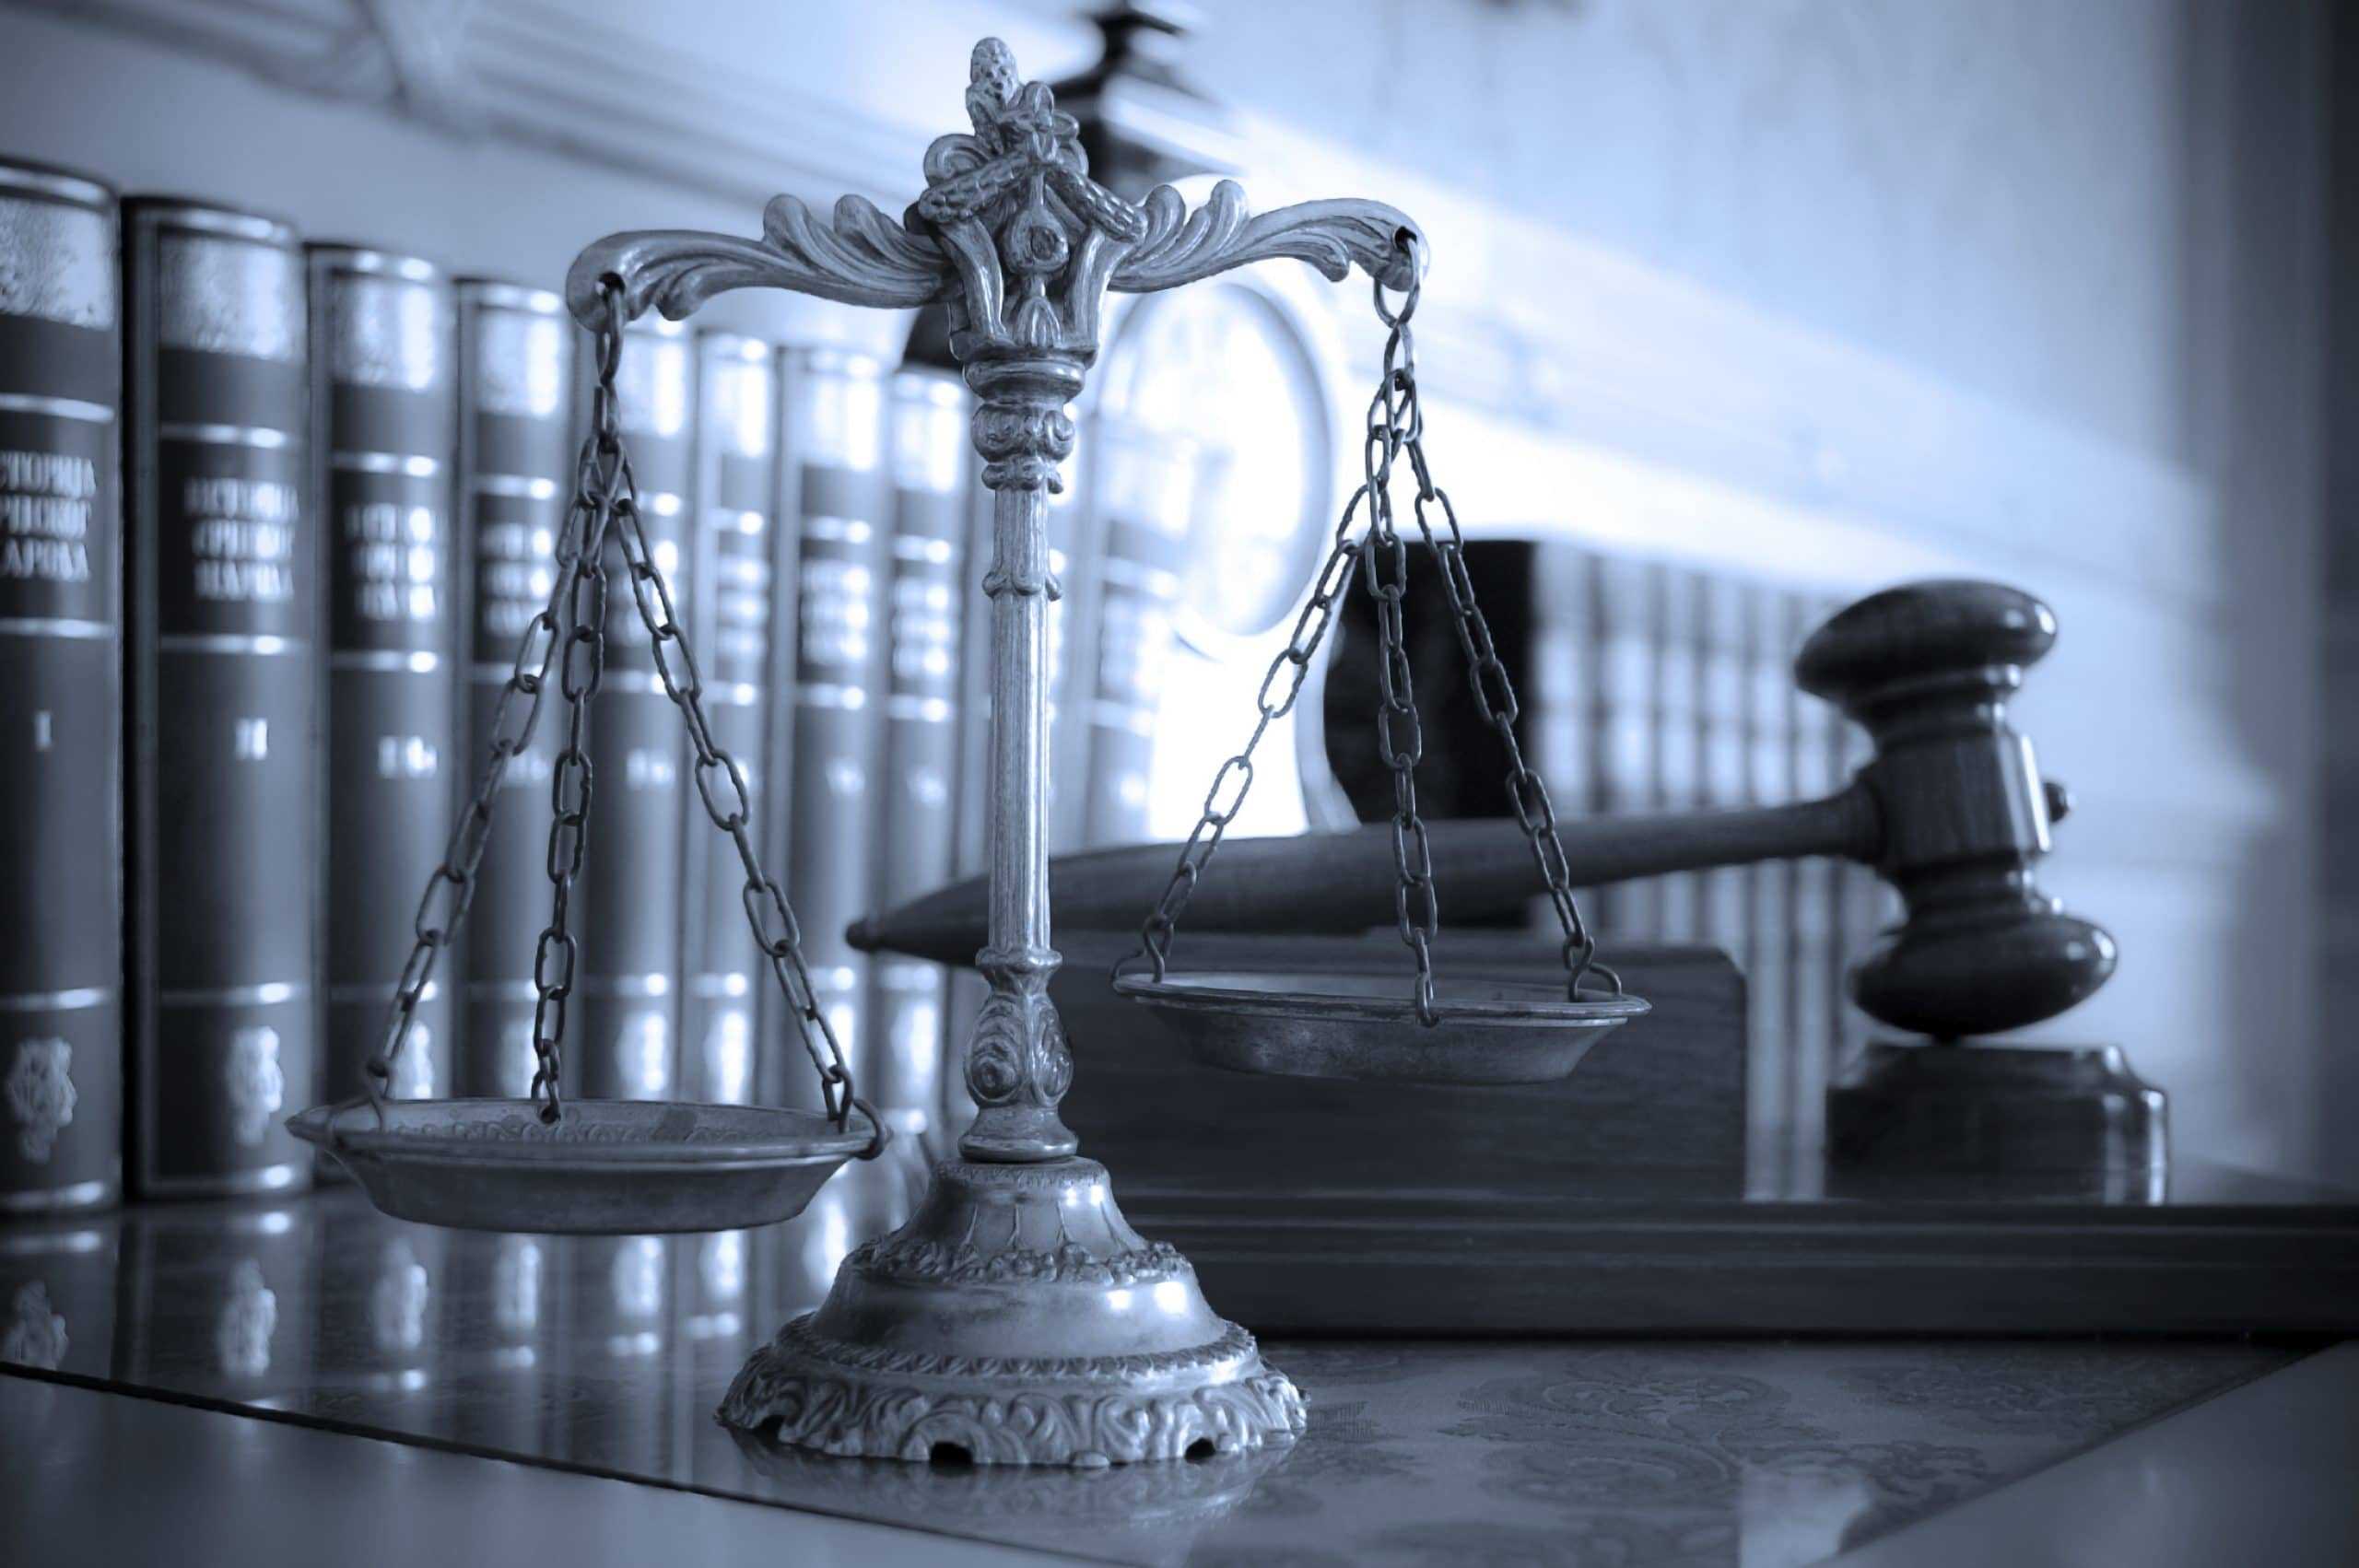 Scales of justice next to a gavel and law books on a desk.